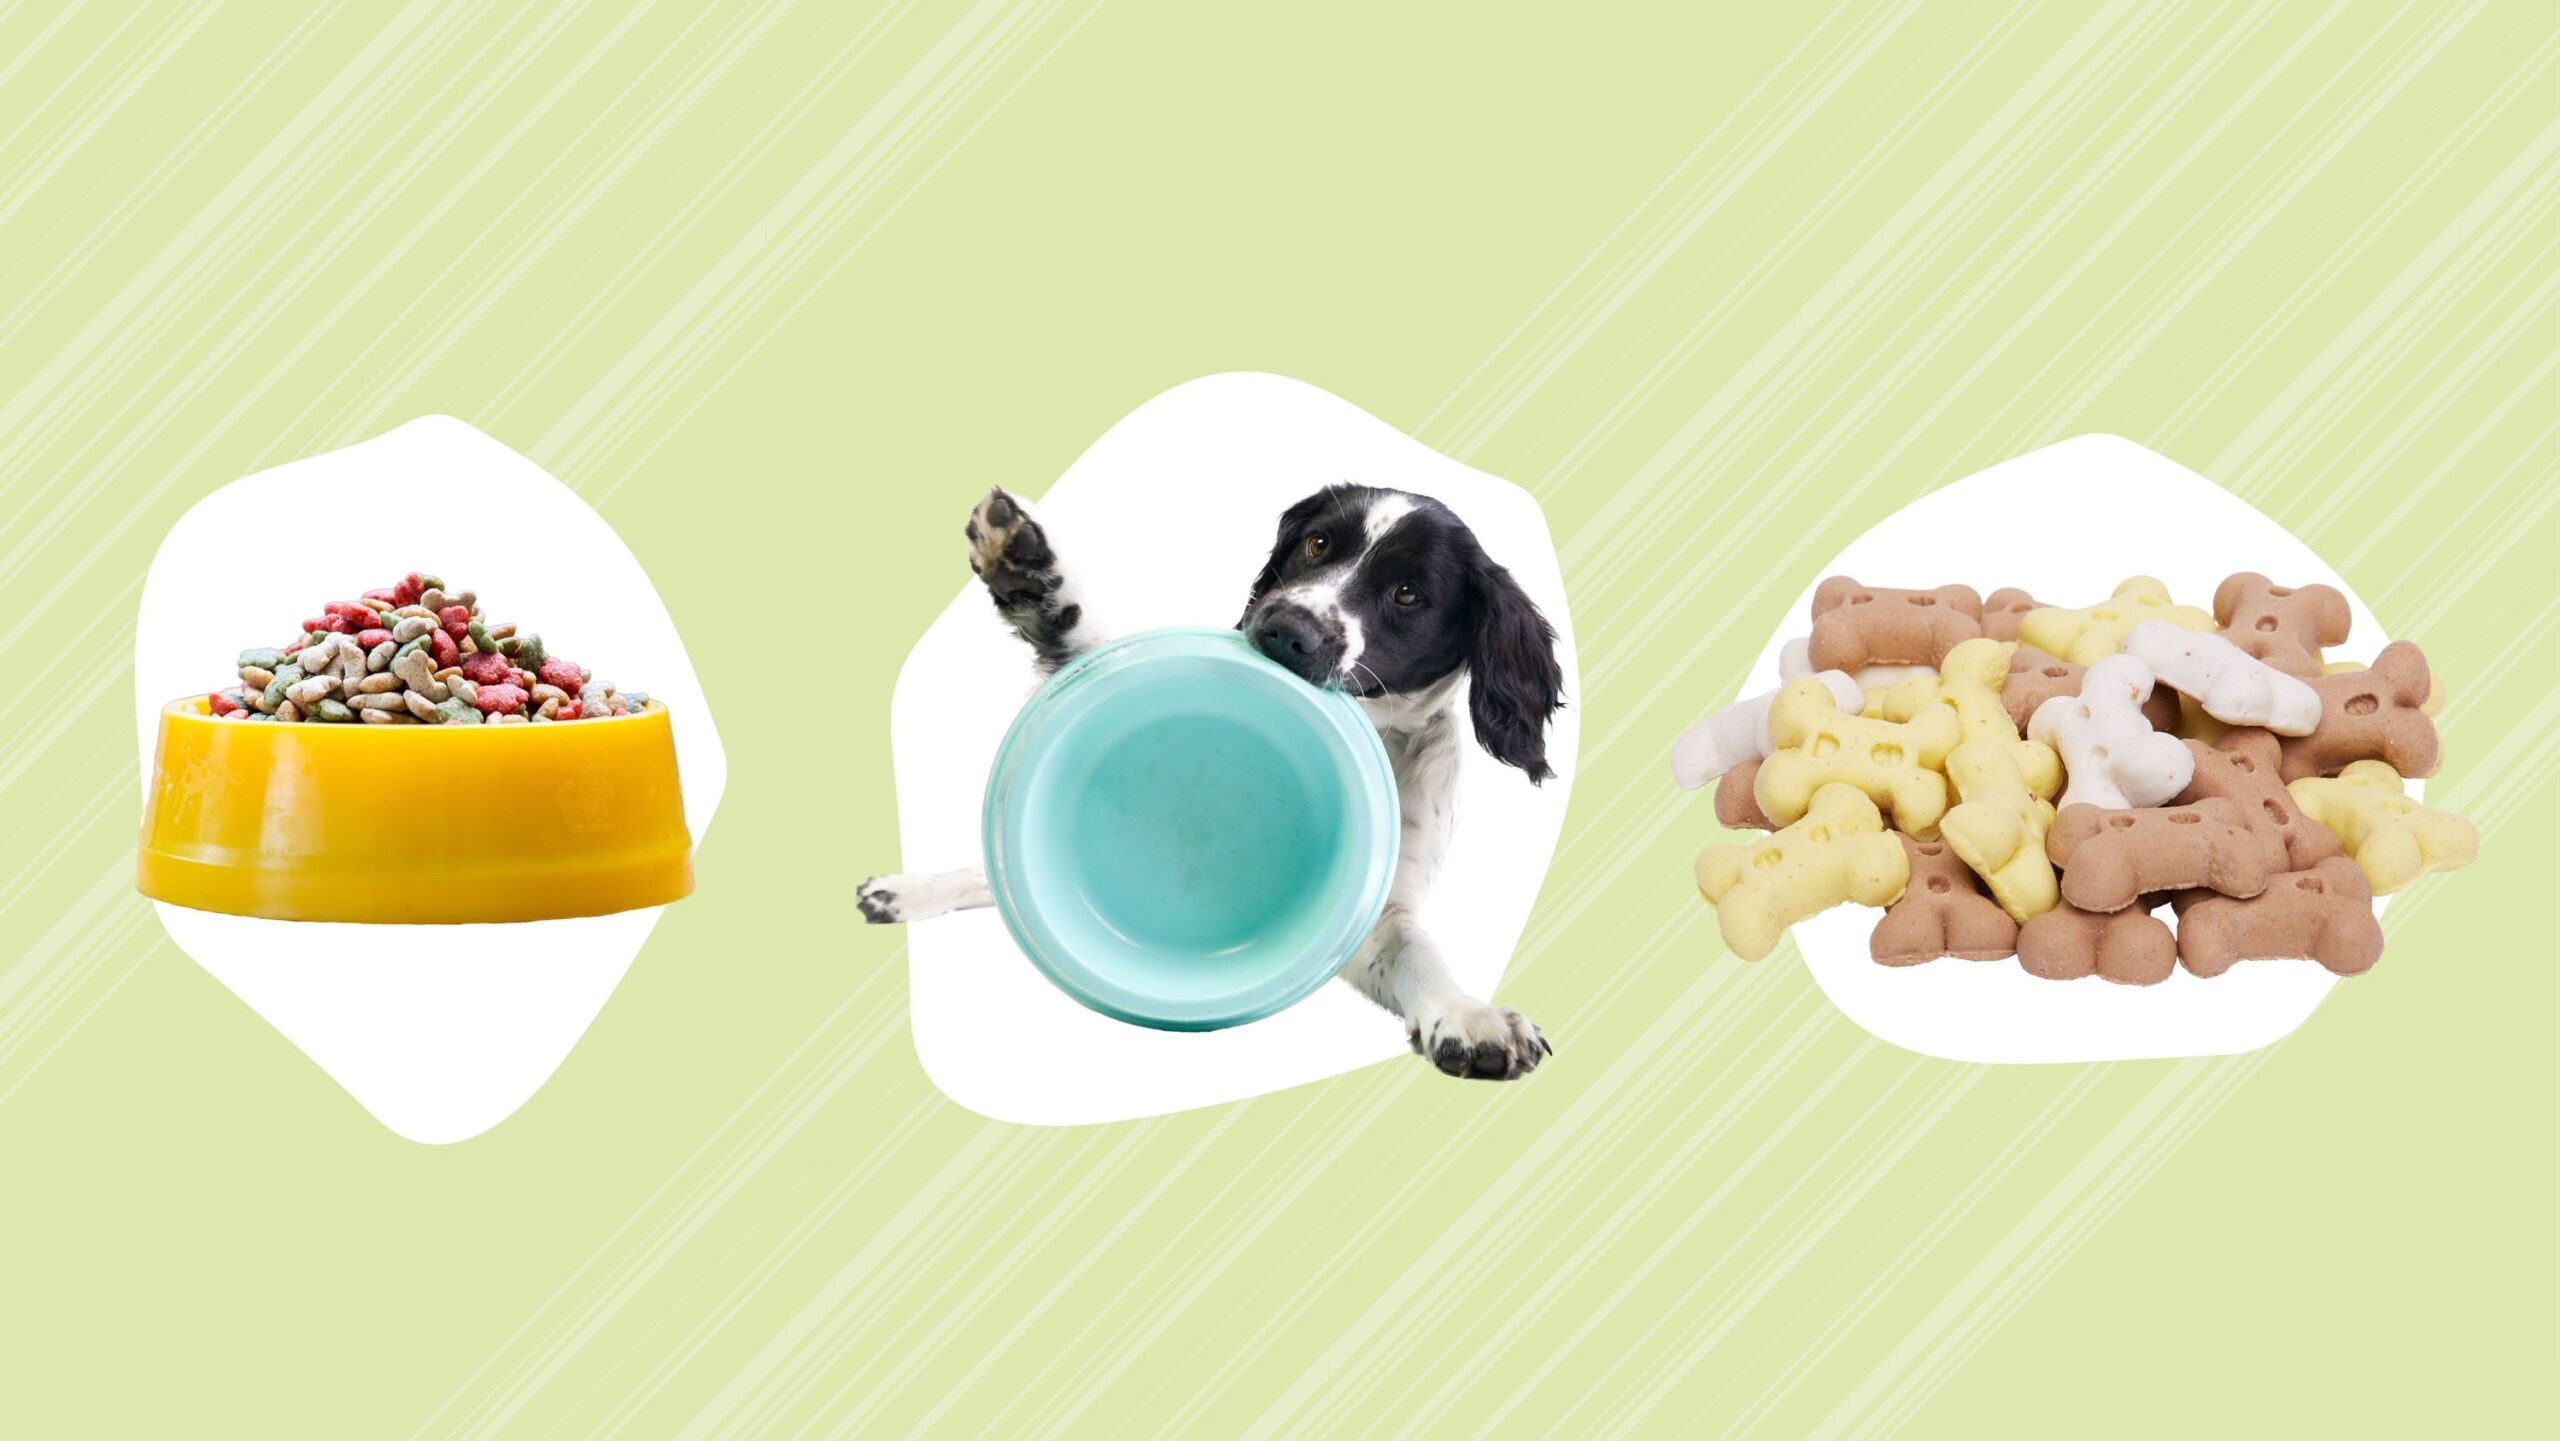 Foods Choices for Your Furry Friend